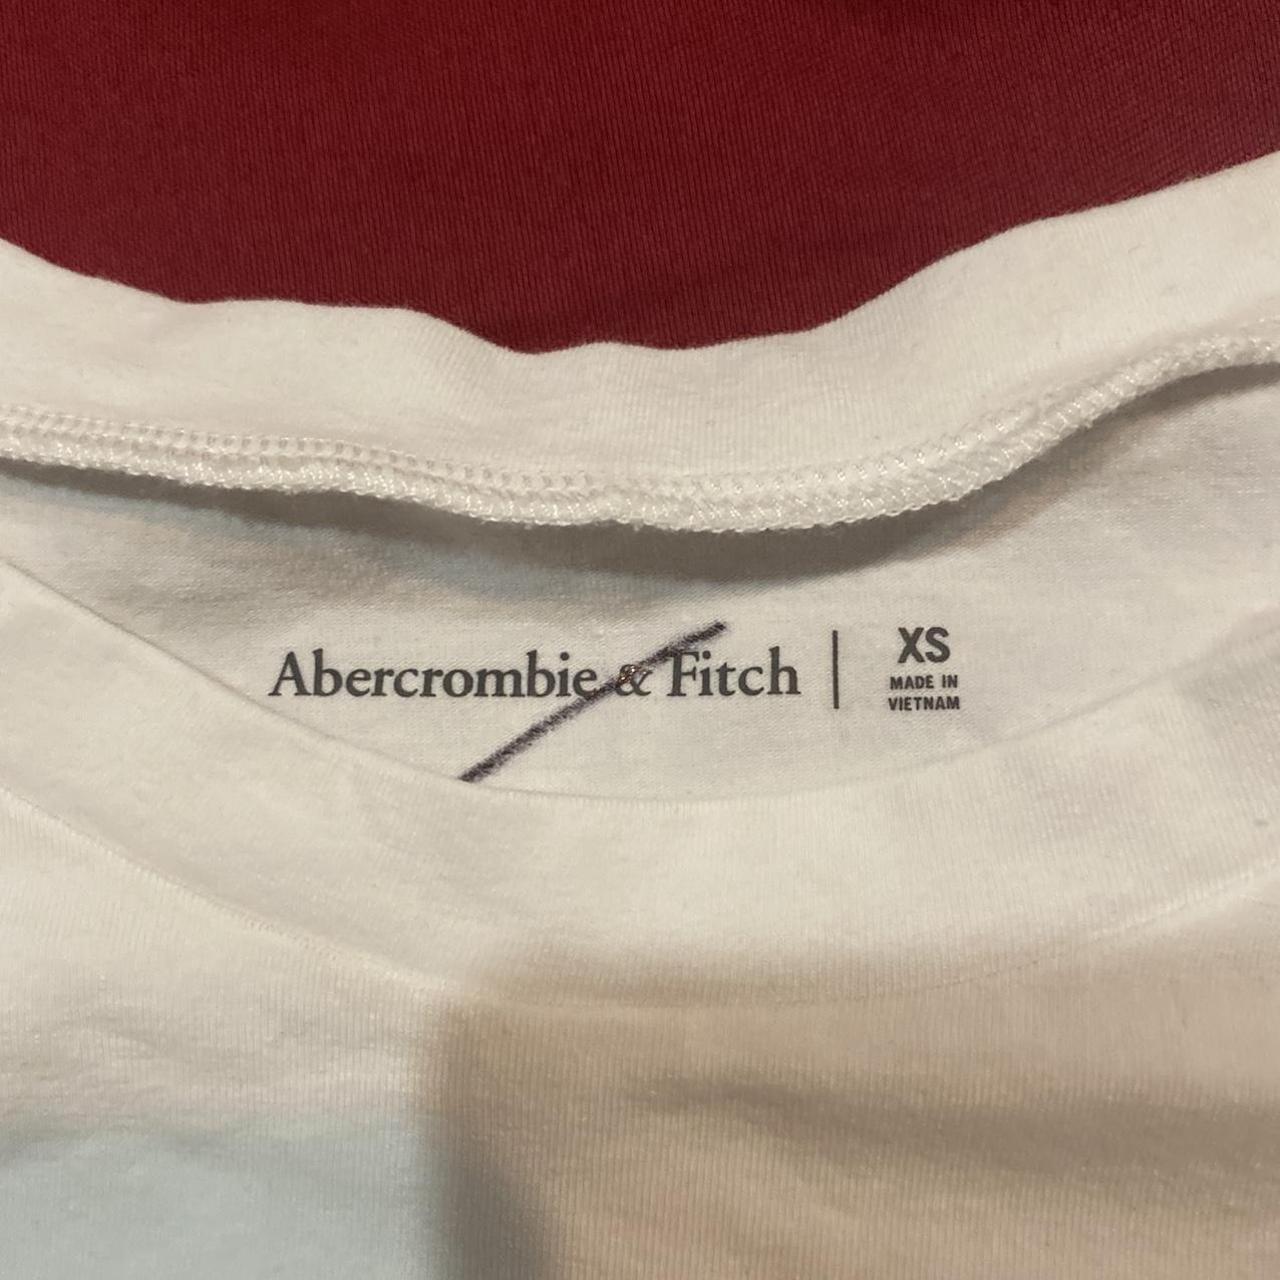 Abercrombie & Fitch Women's Black and White Shirt (2)